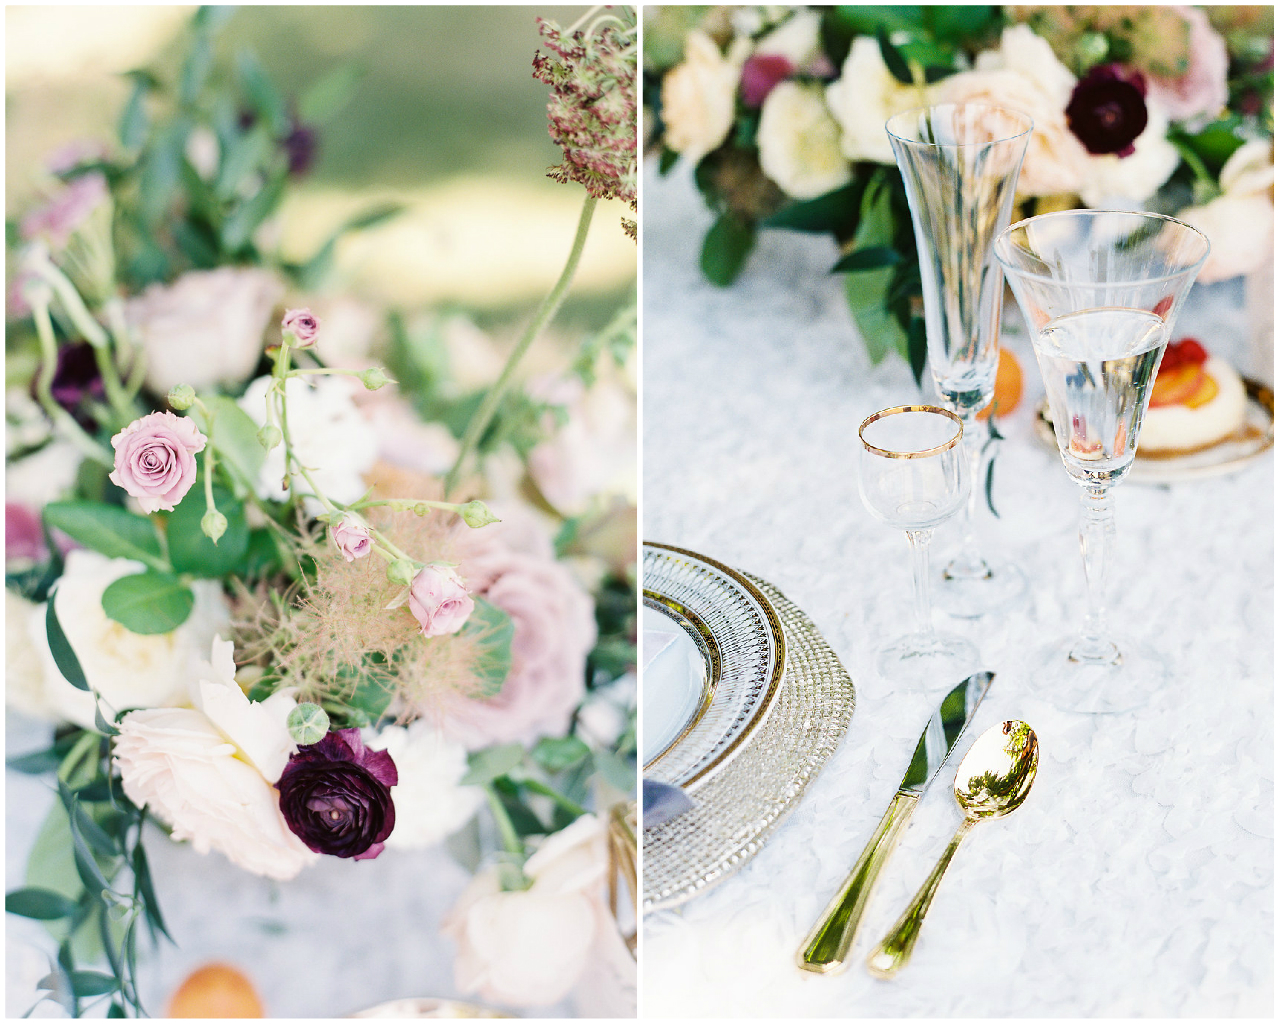 Bloom the Workshop | The Day's Design | Ashley Slater Photography